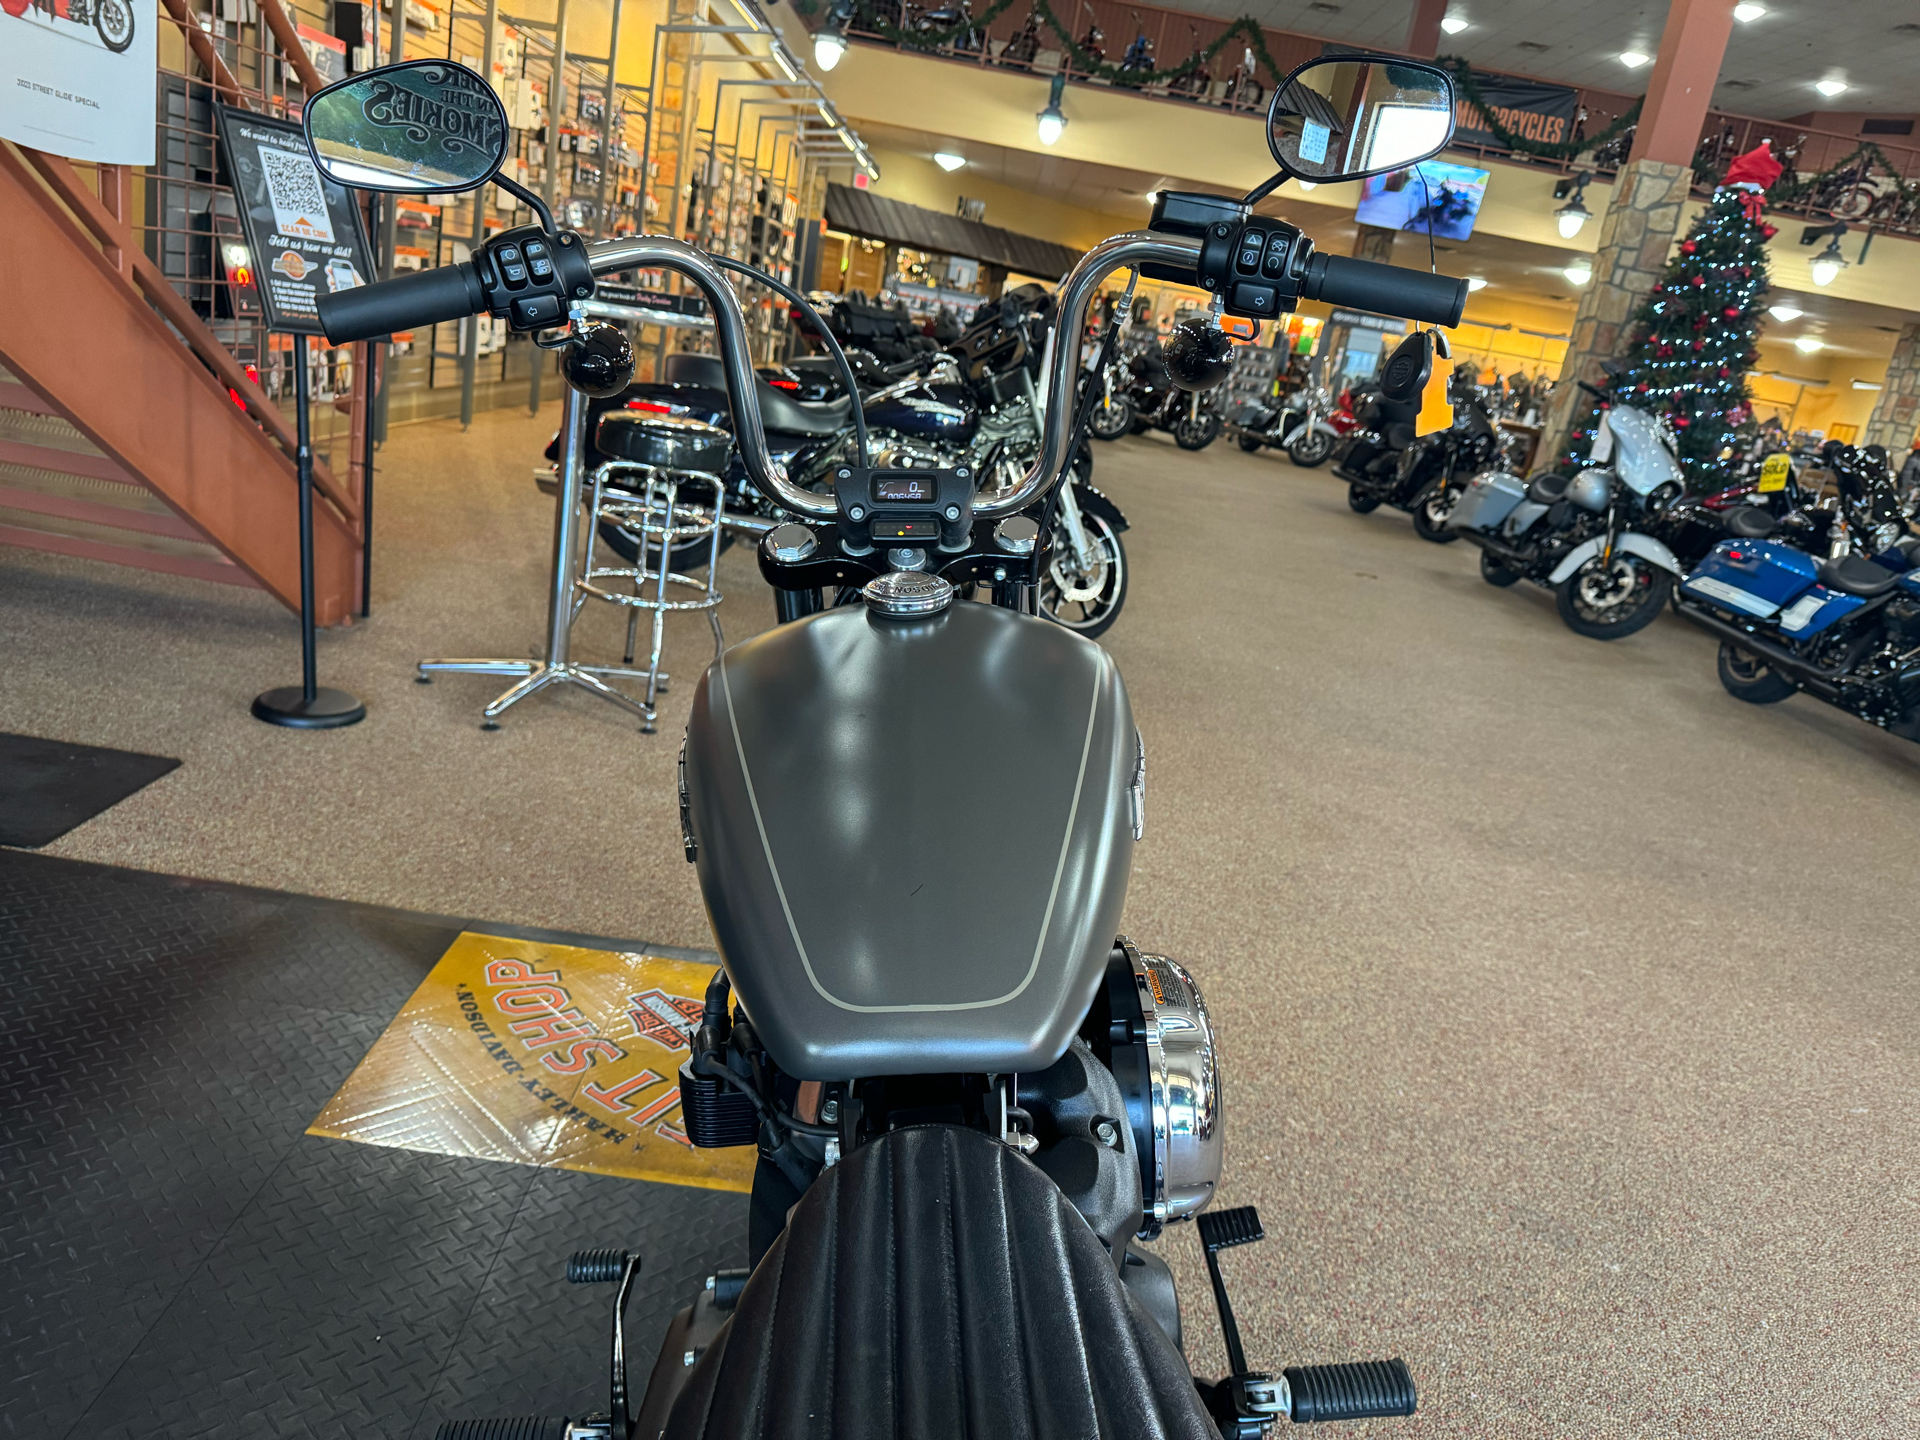 2019 Harley-Davidson Street Bob® in Knoxville, Tennessee - Photo 16